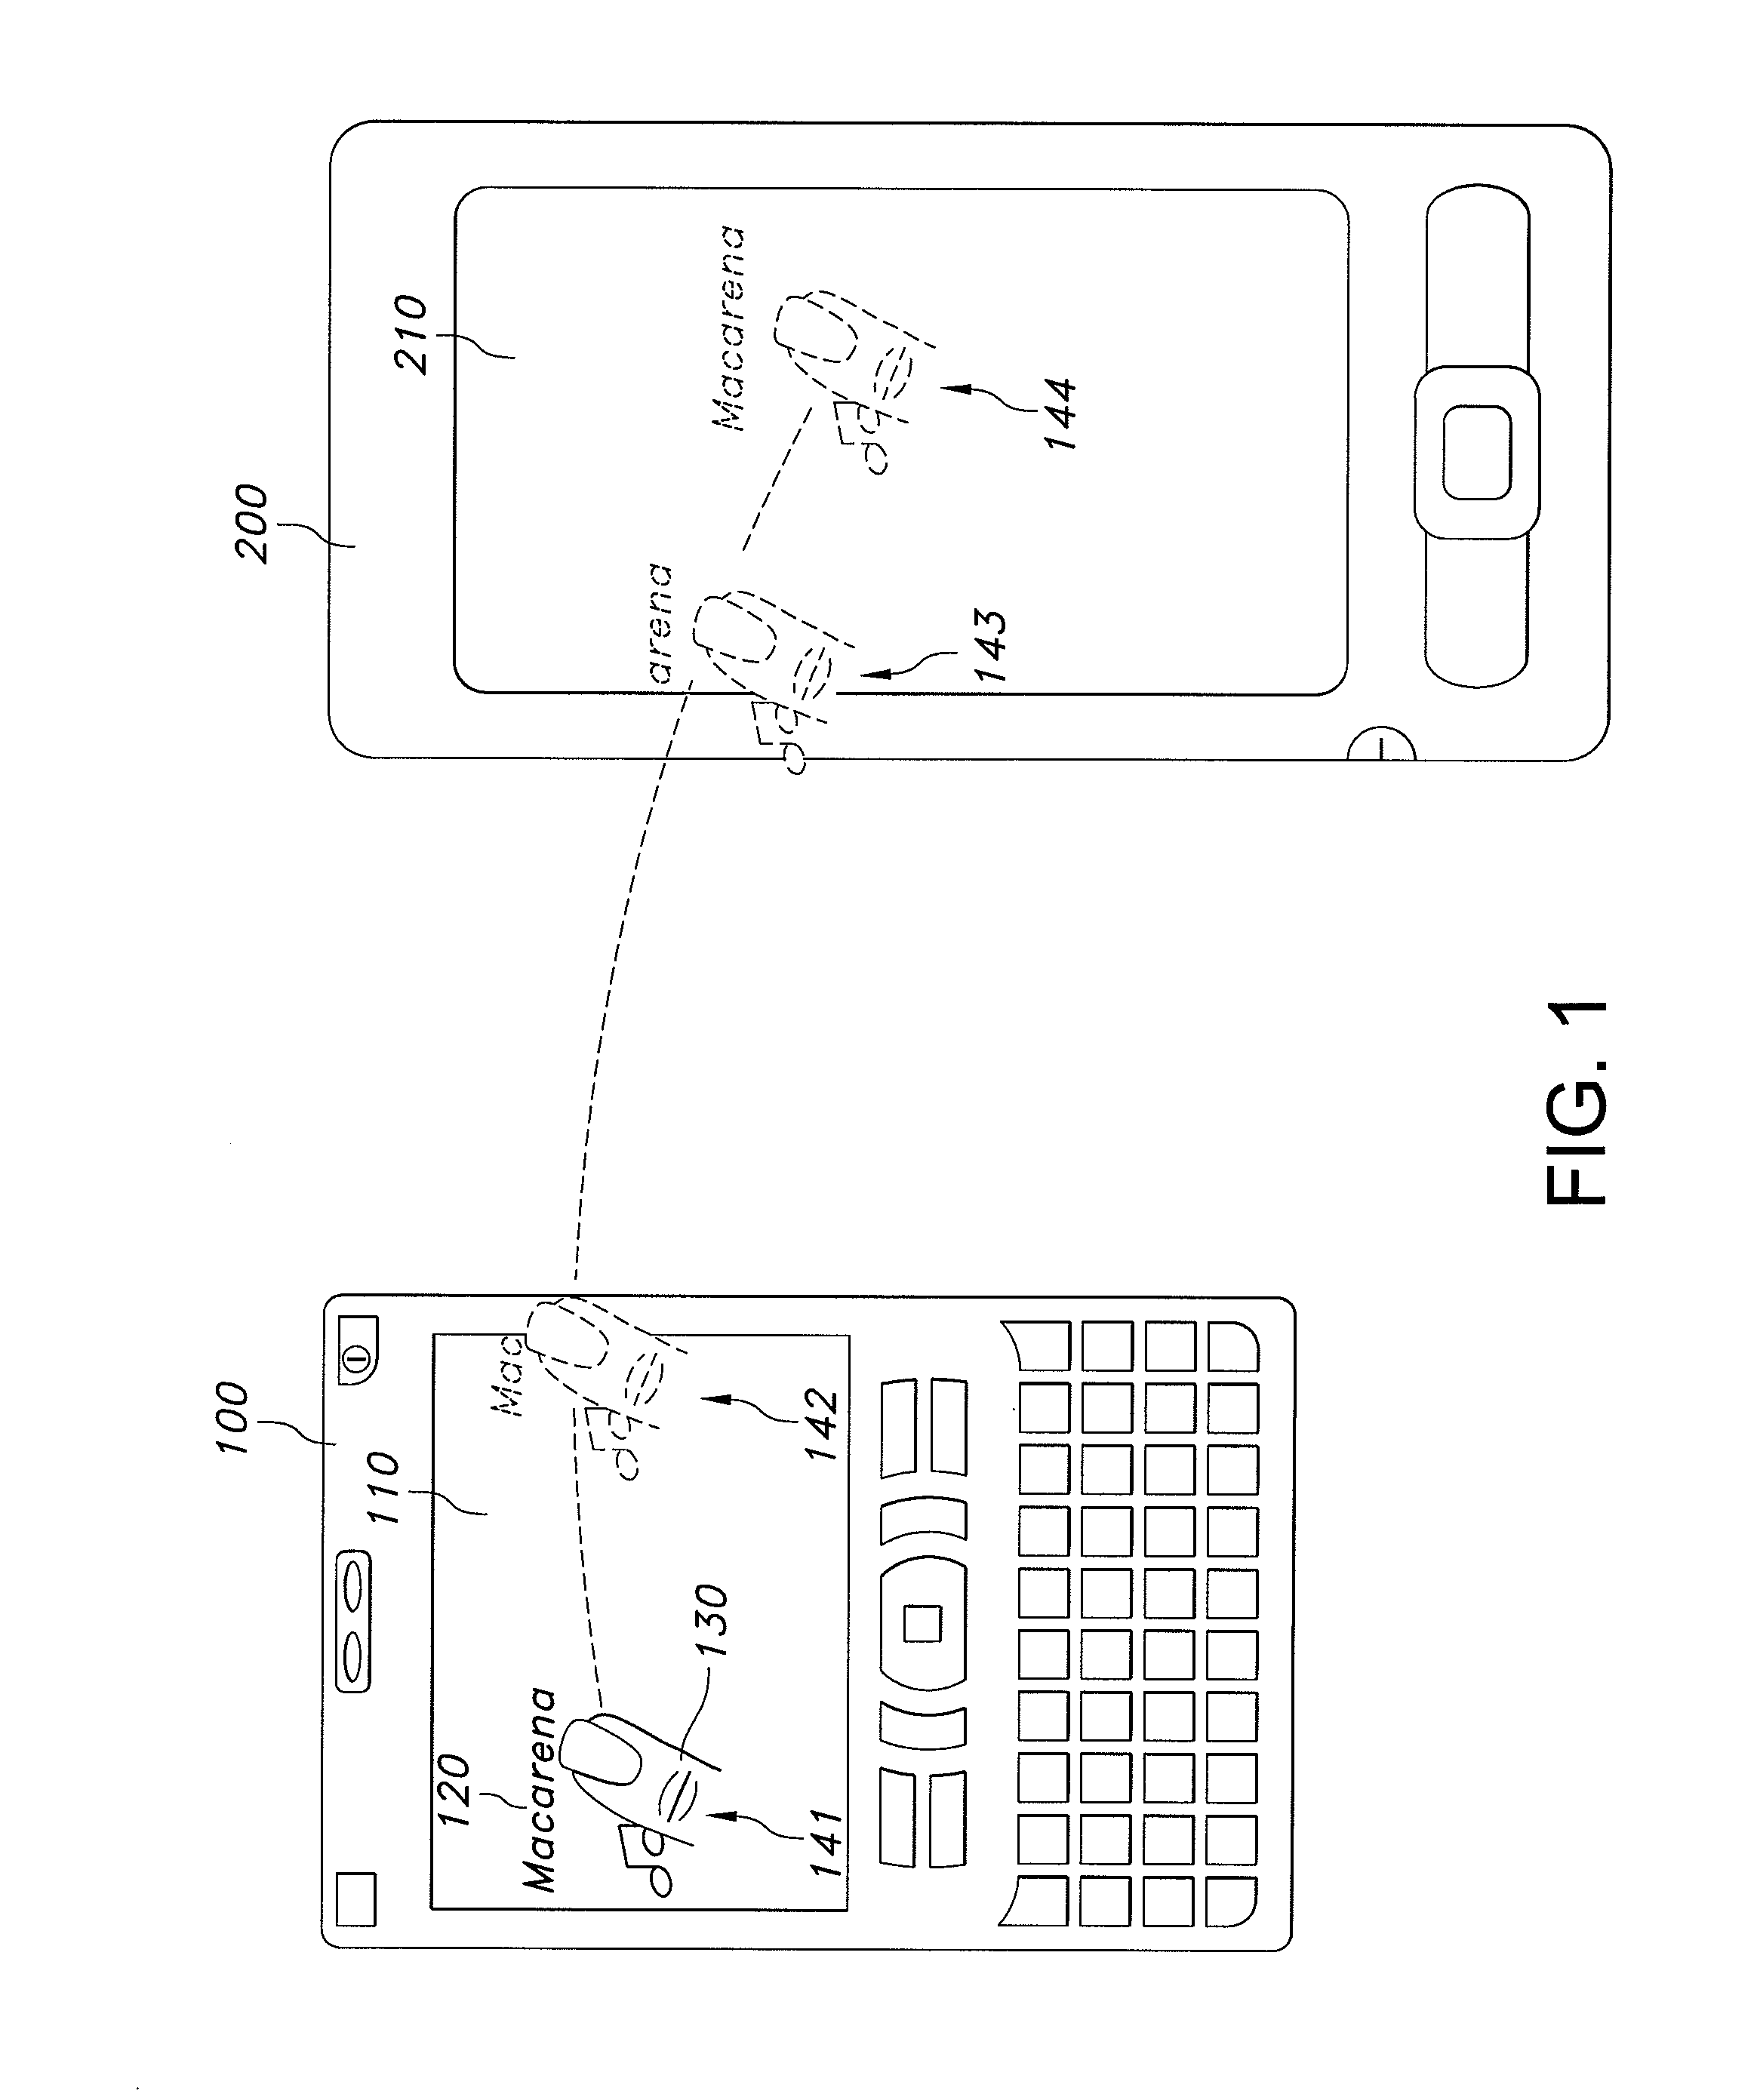 Method, apparatus and computer program product for transferring files between devices via drag and drop